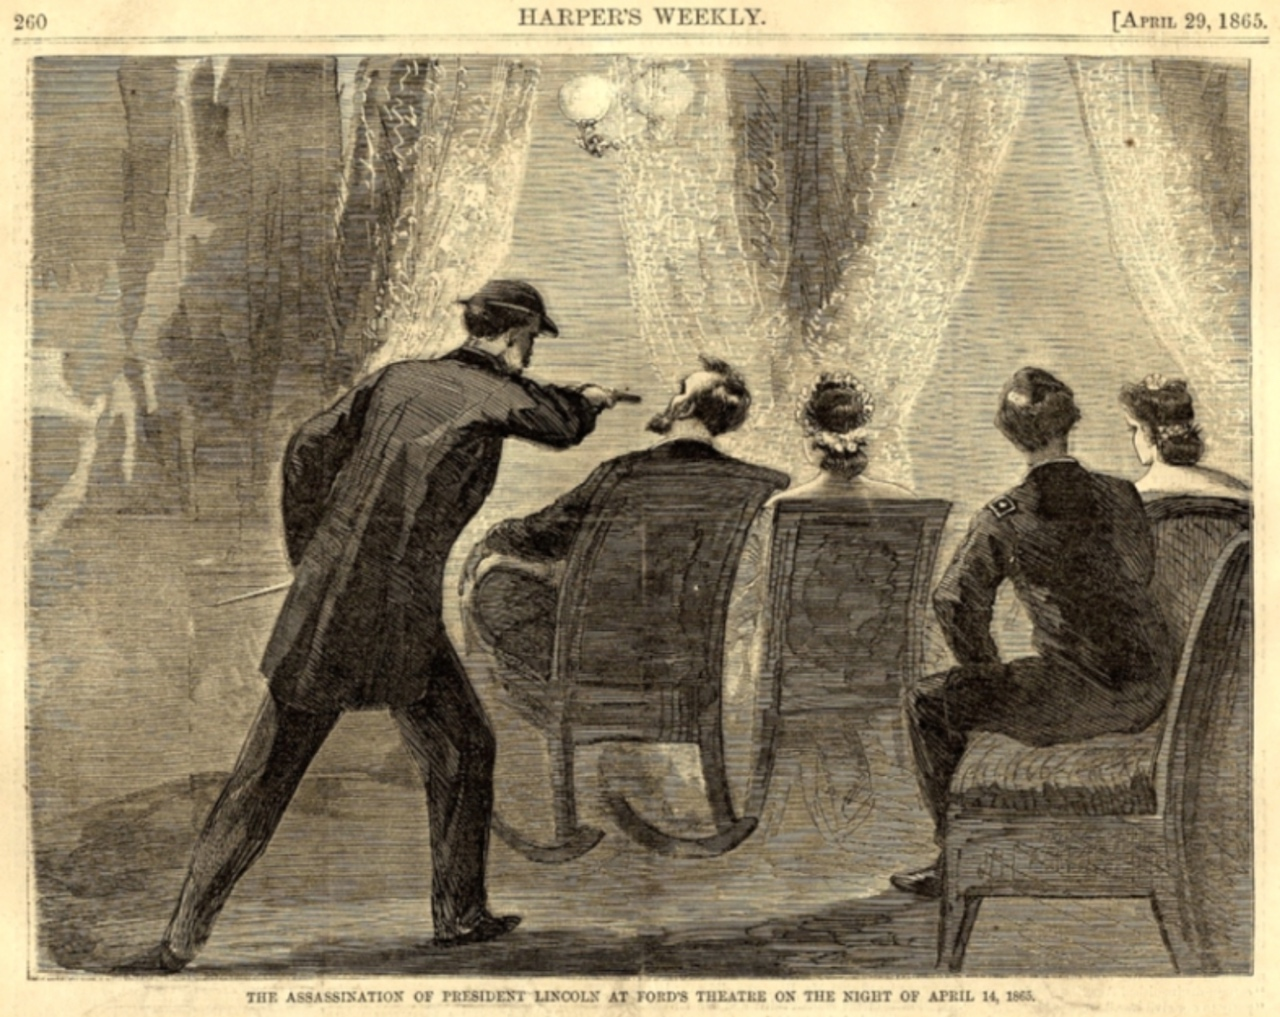 The assassination of Abraham Lincoln while in attendance at theatre.